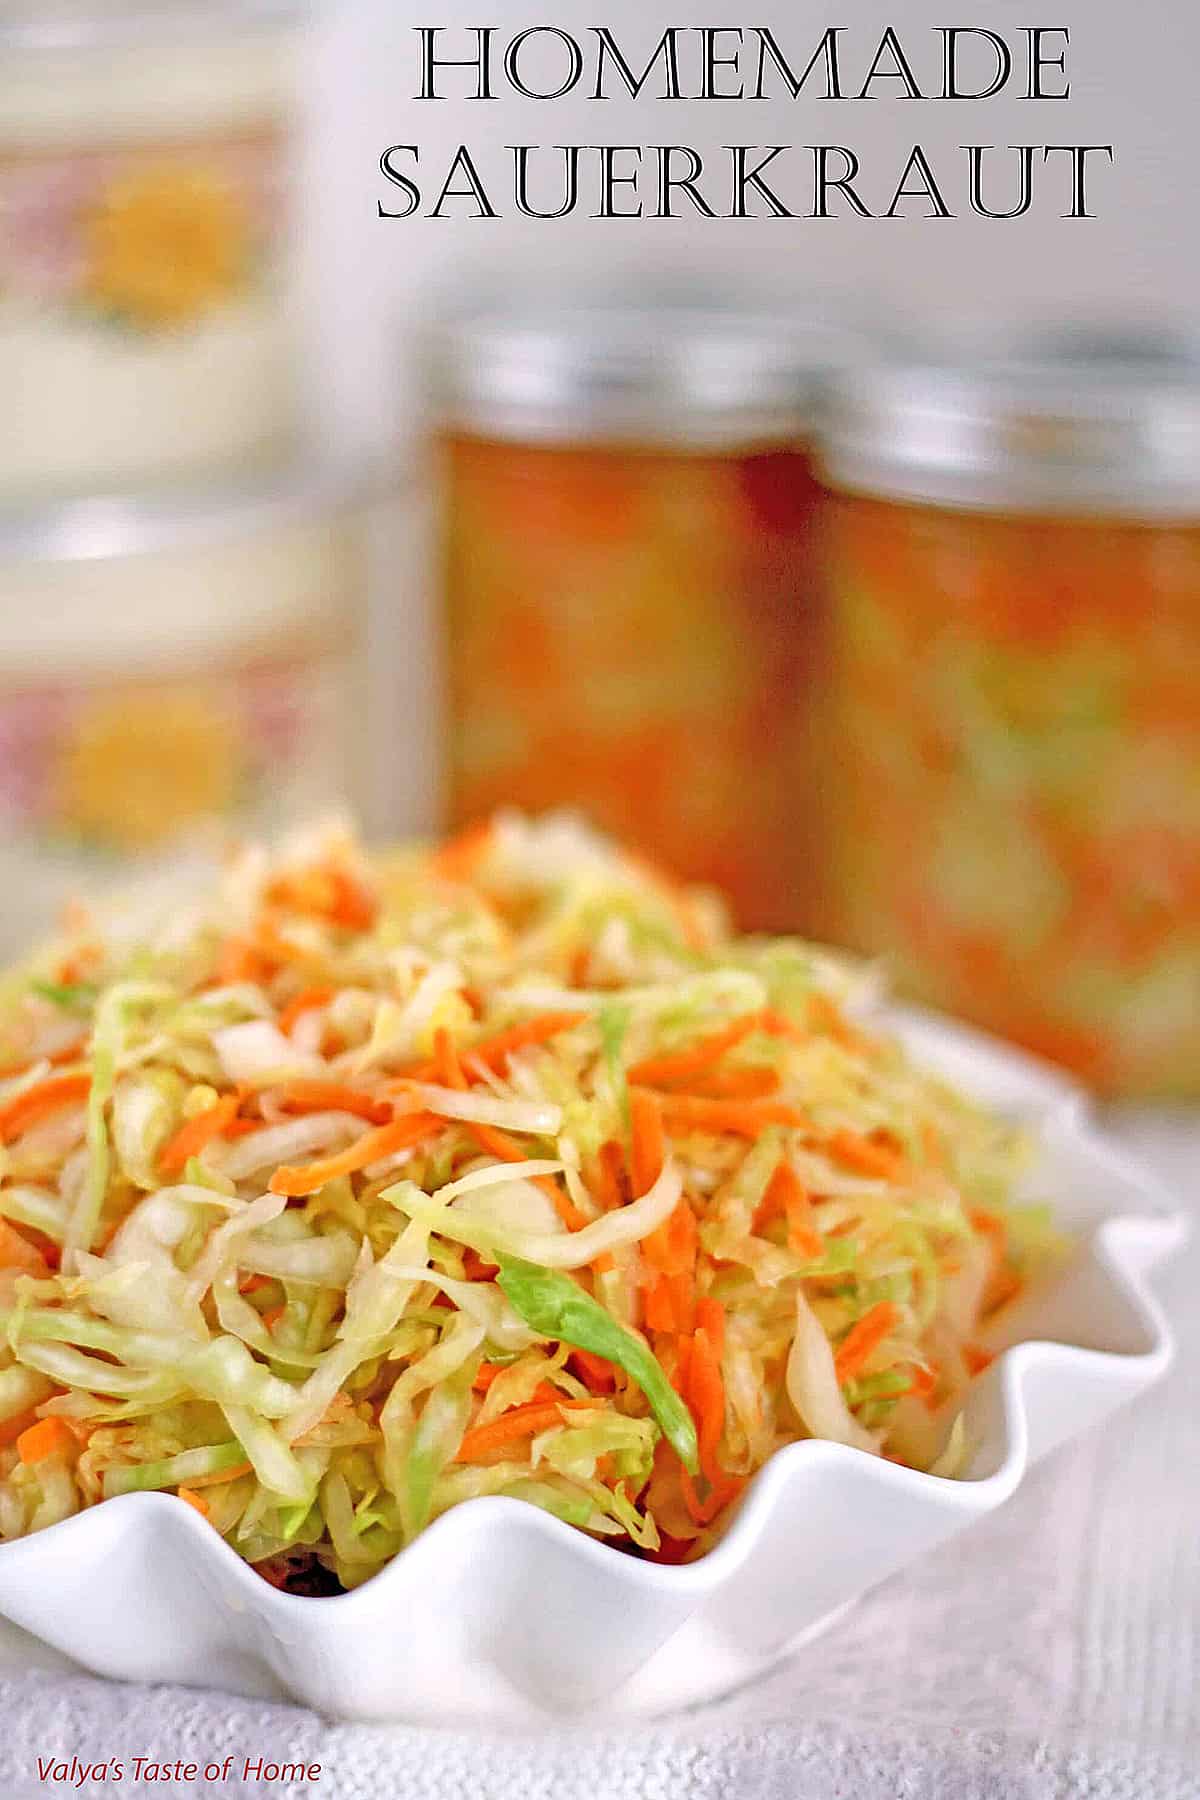 Sauerkraut is made of finely cut fresh cabbage and grated carrots (optional, but my preference) that has been lacto-fermentated. It is super easy to make and tastes way better than any store bough sauerkraut. 